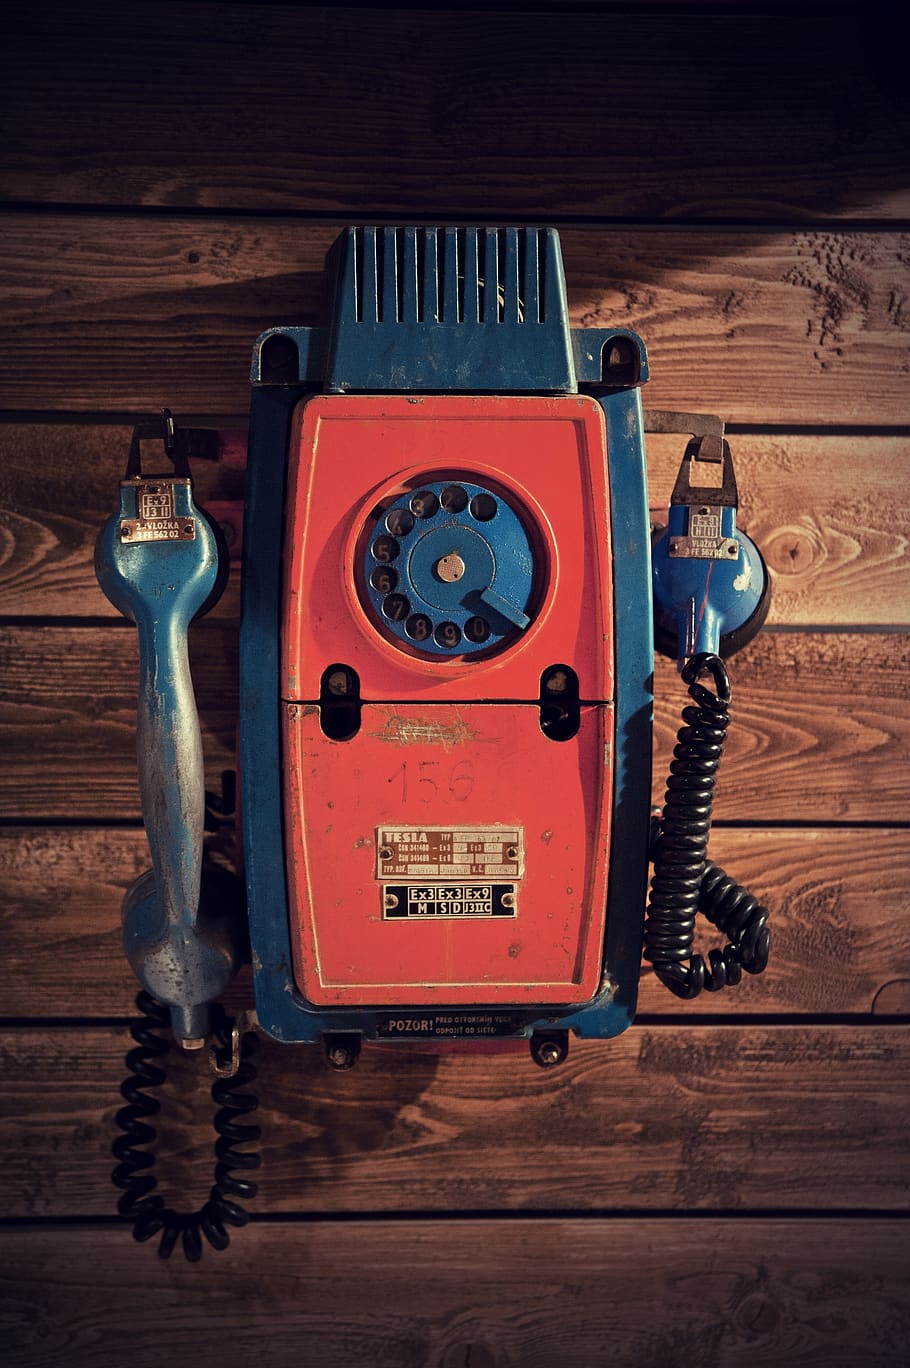 phone, the handset, technology, wood - material, communication, retro styled, telephone, indoors, connection, antique